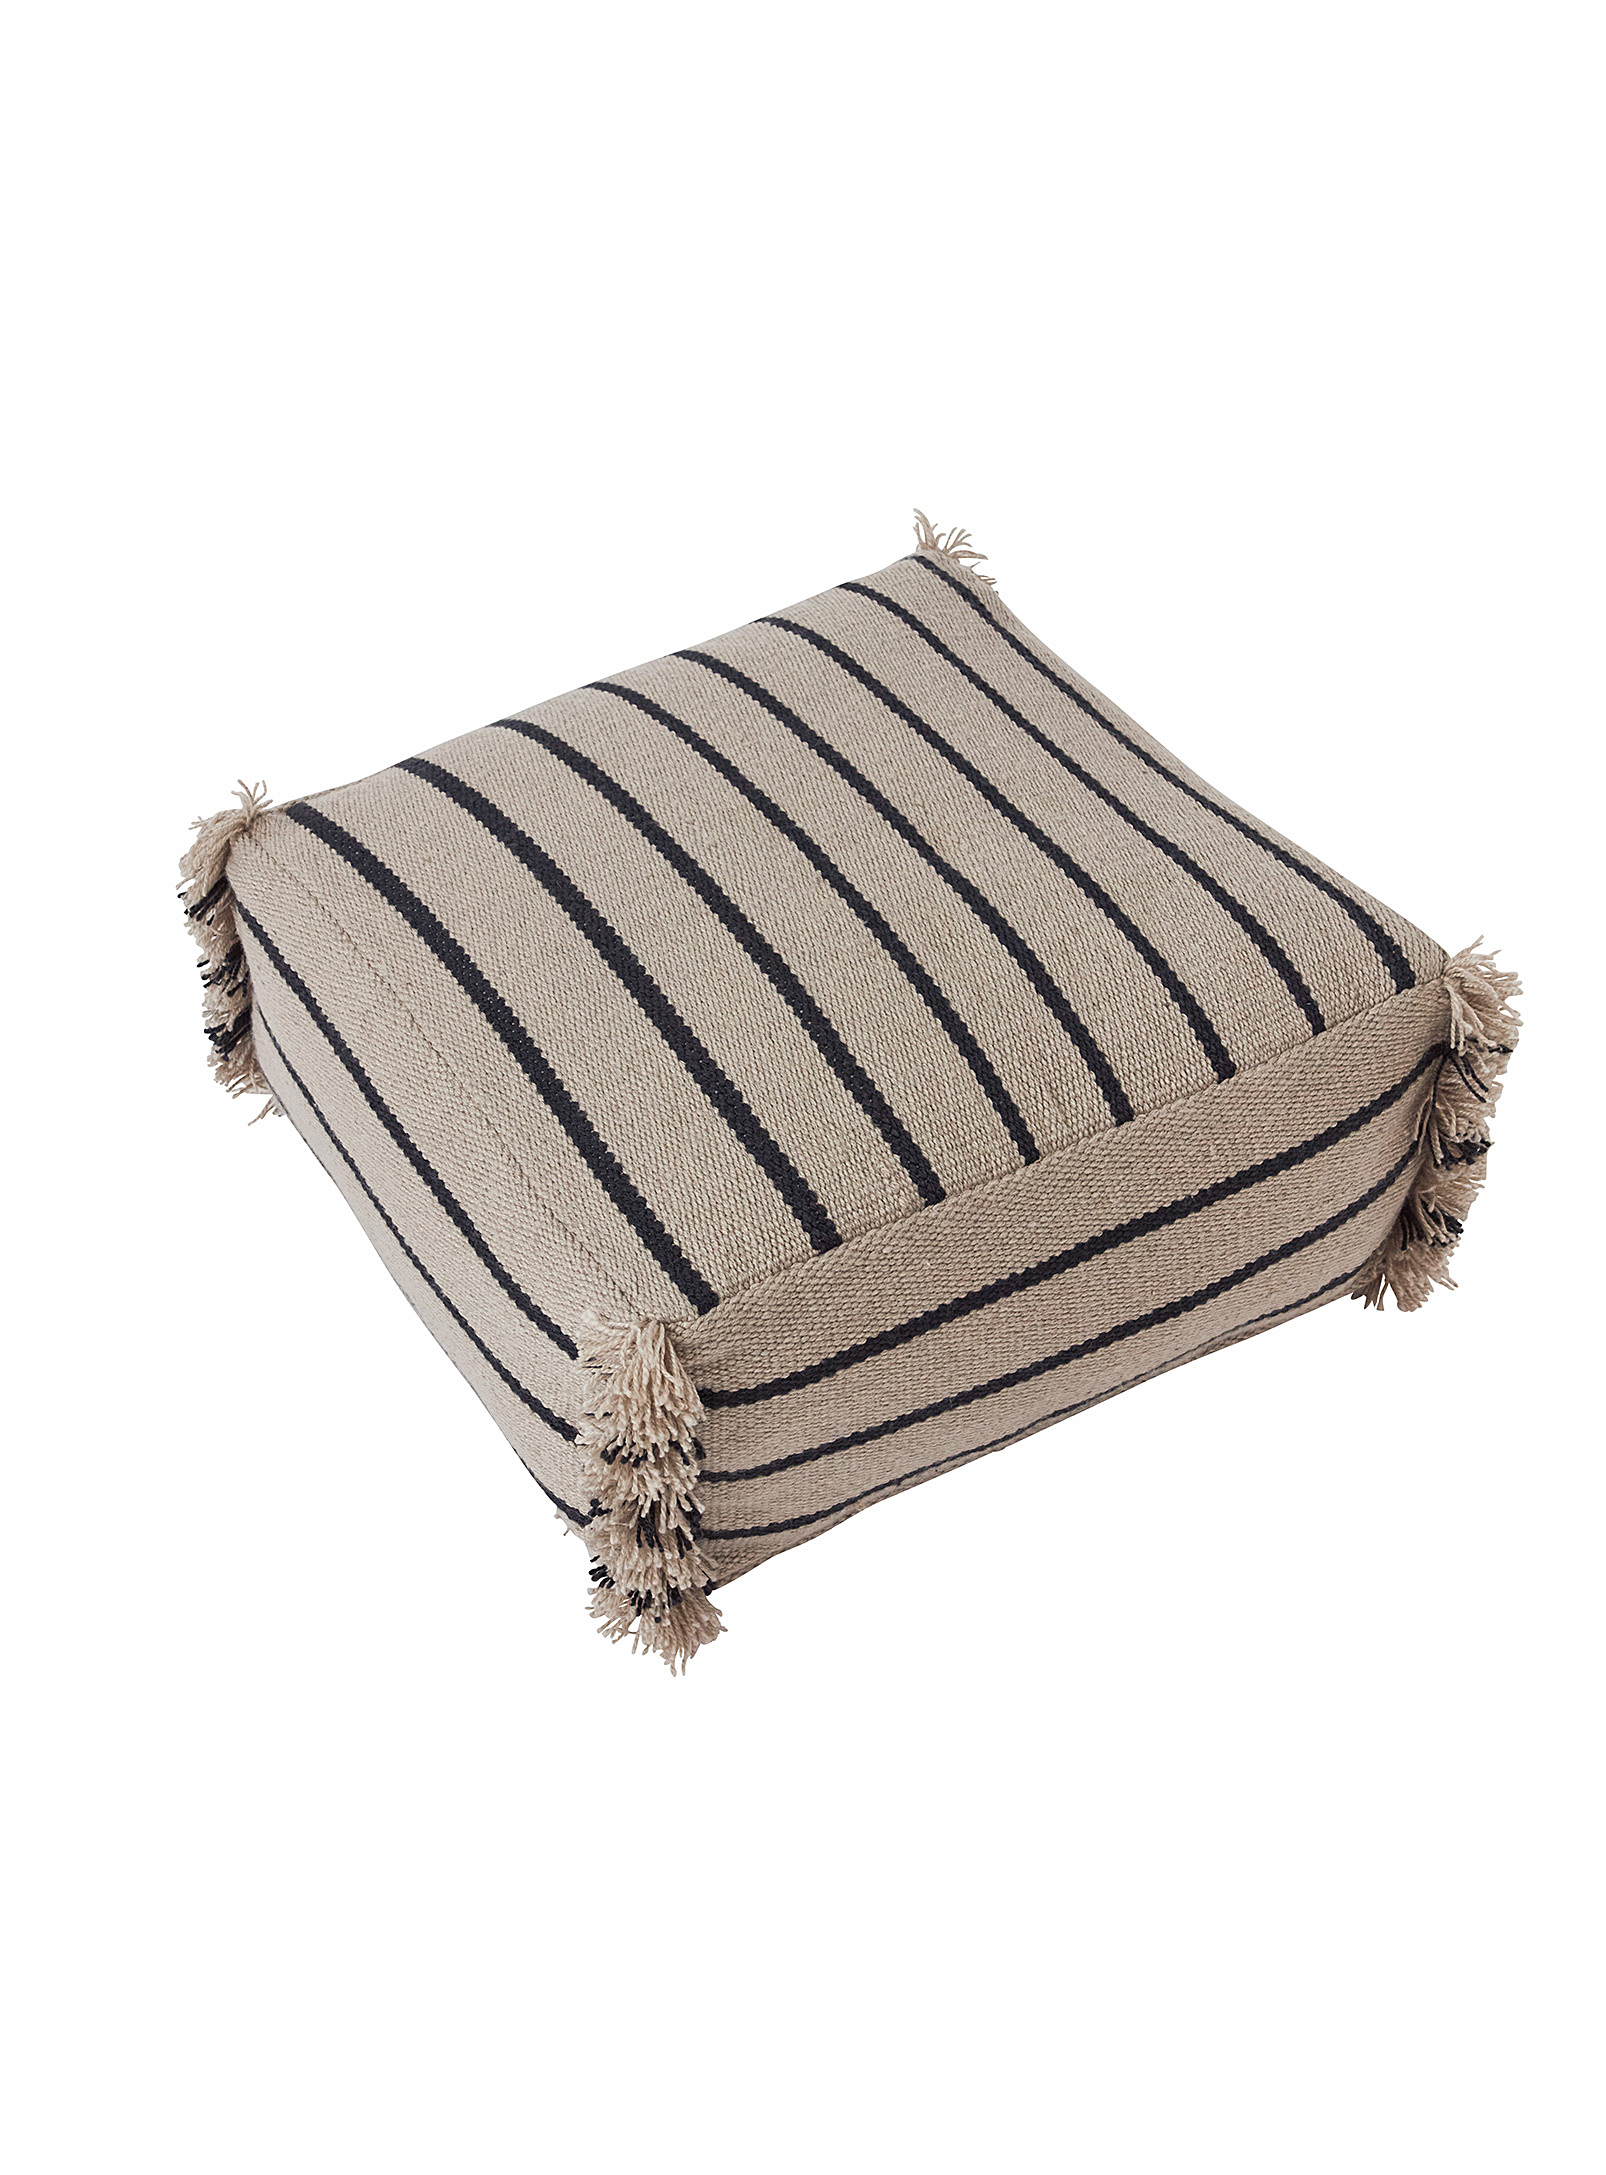 Oyoy Living Design Contrasting Stripes Square Pouf In Black And White